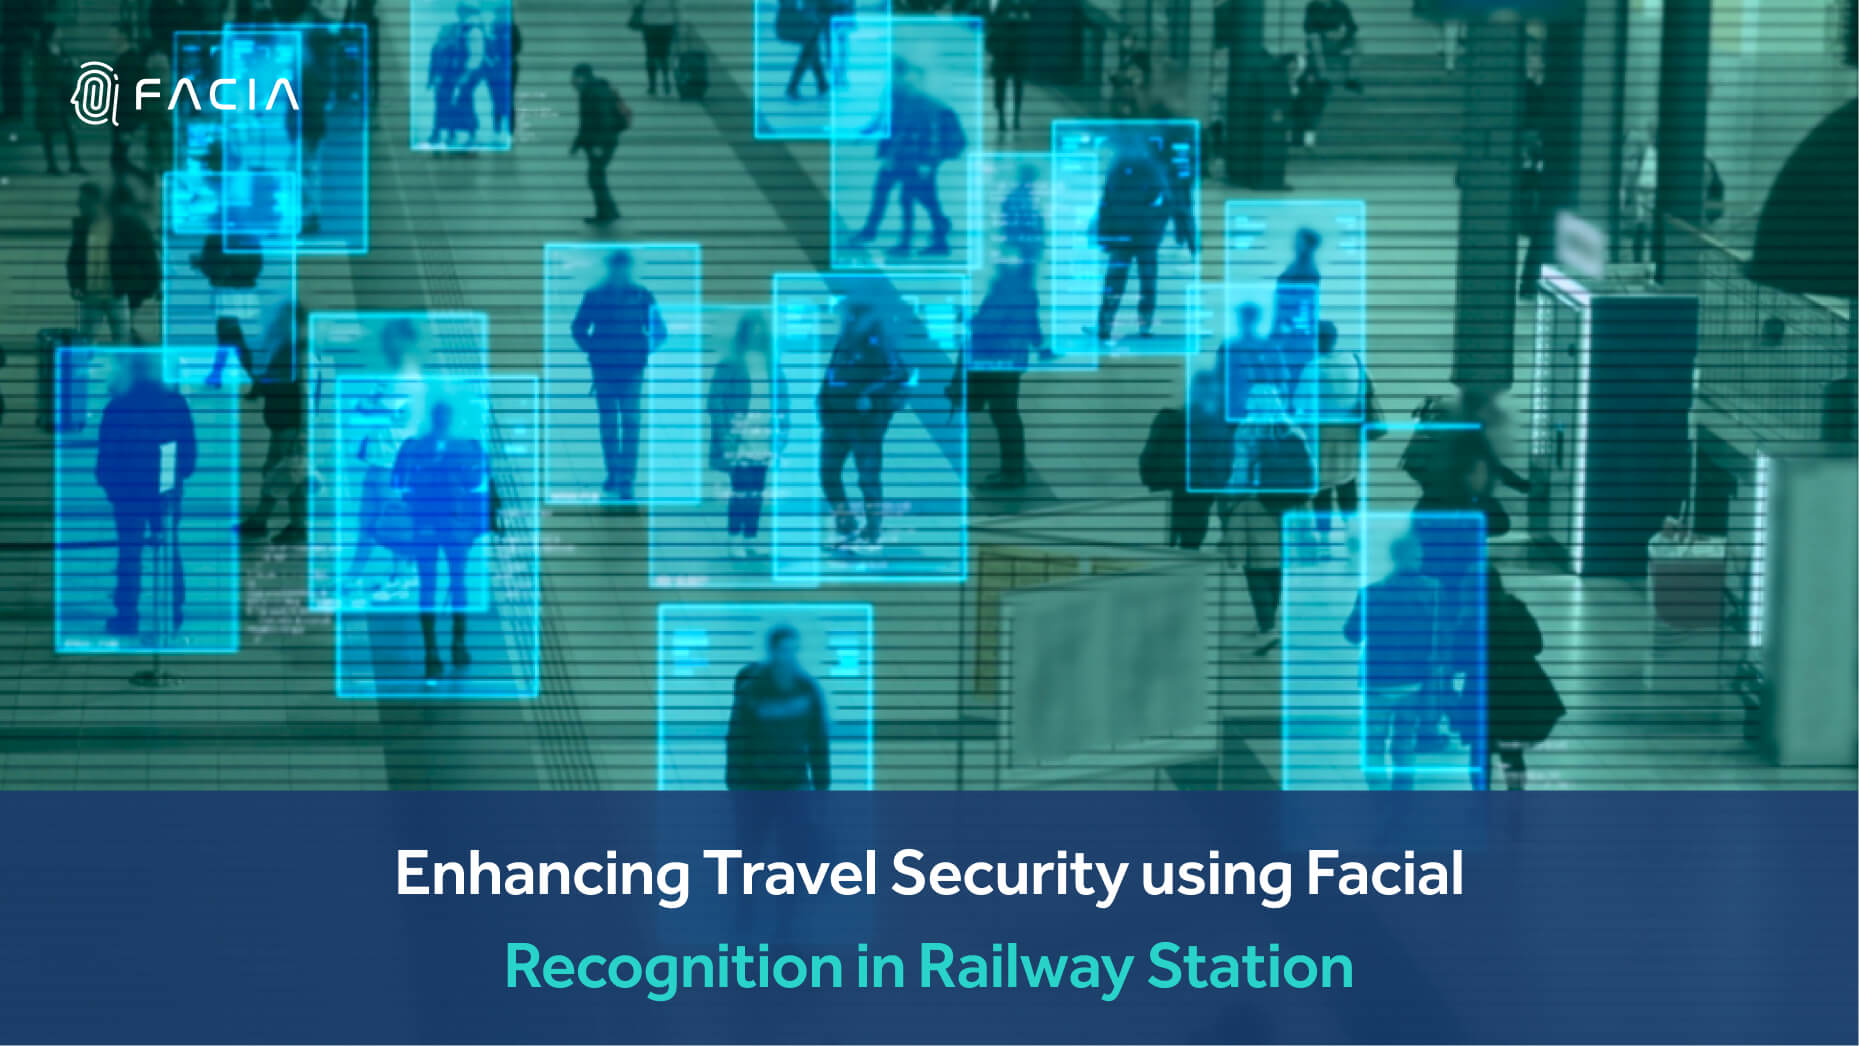 Using facial recognition in railway station can help to enhance the overall level of safety provided by existing security protocols.